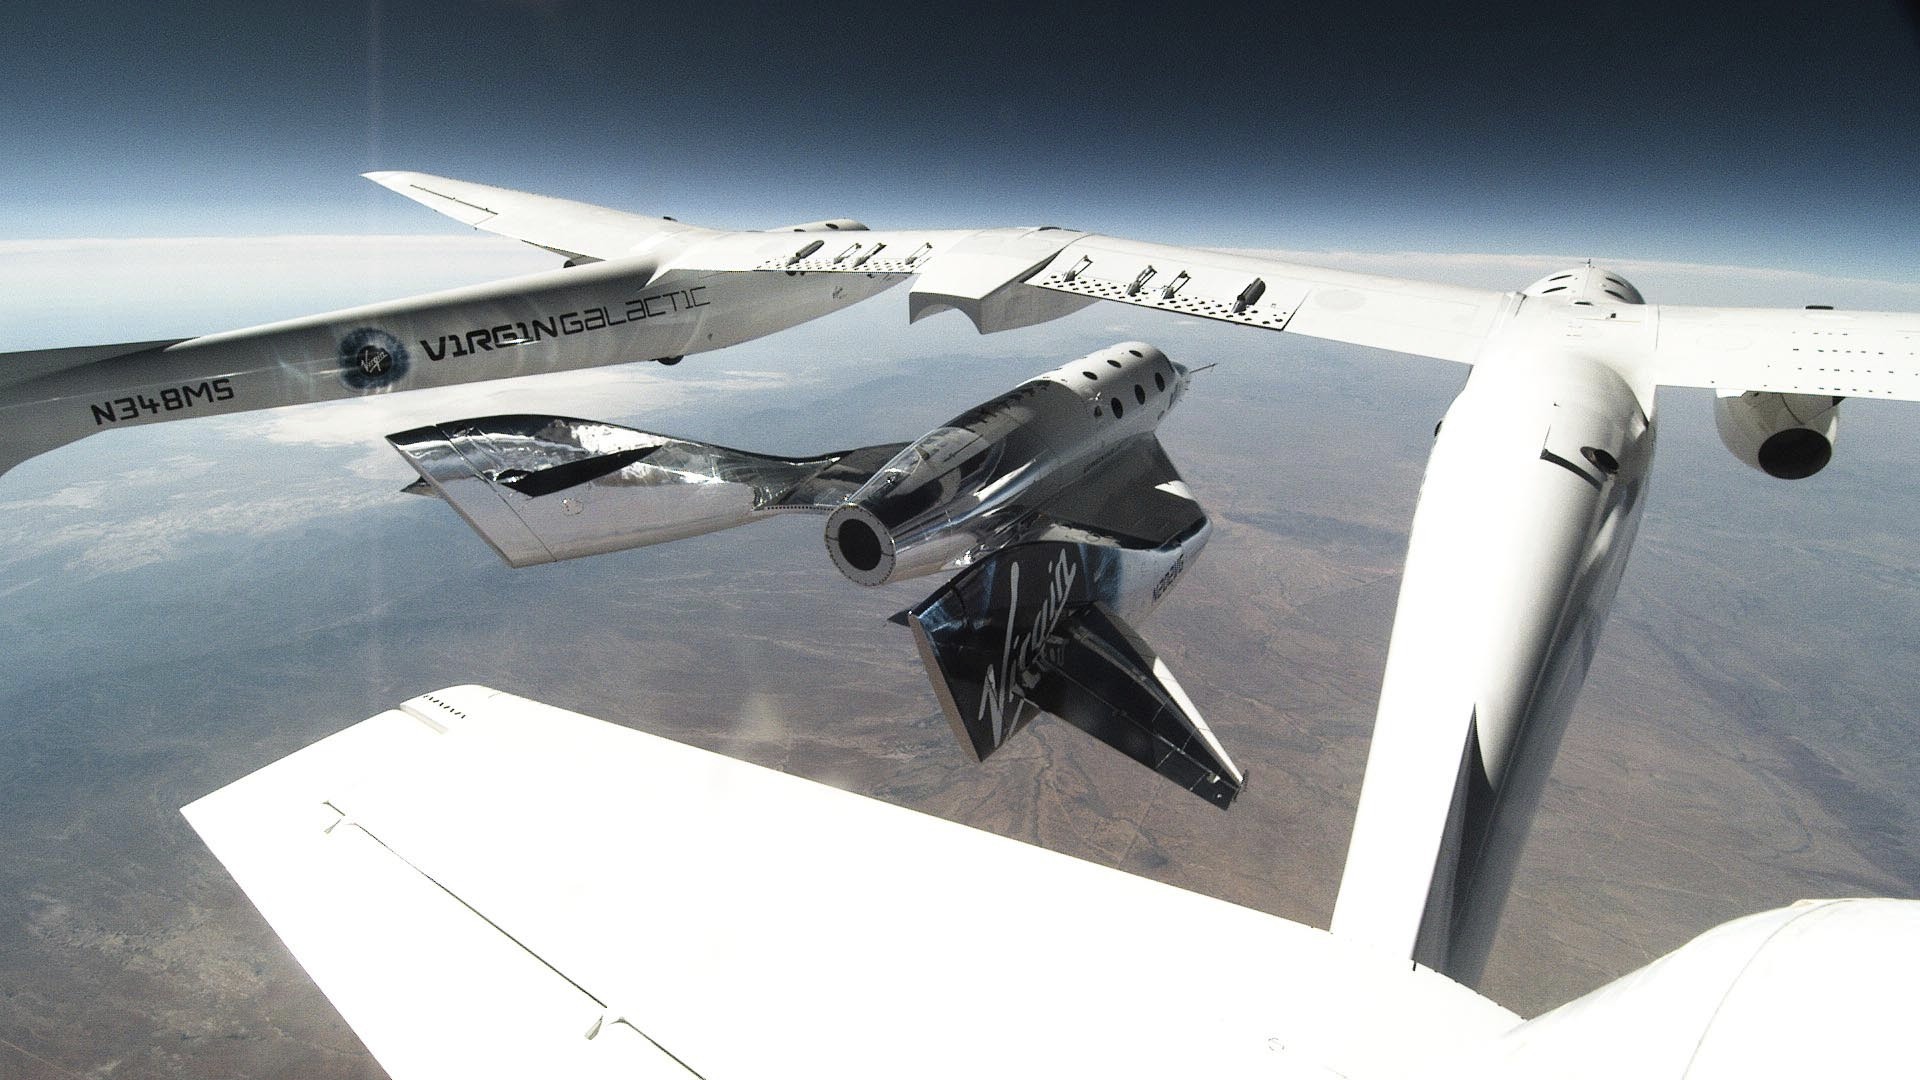 things you should know about Virgin Galactic's first fully crewed spaceflight